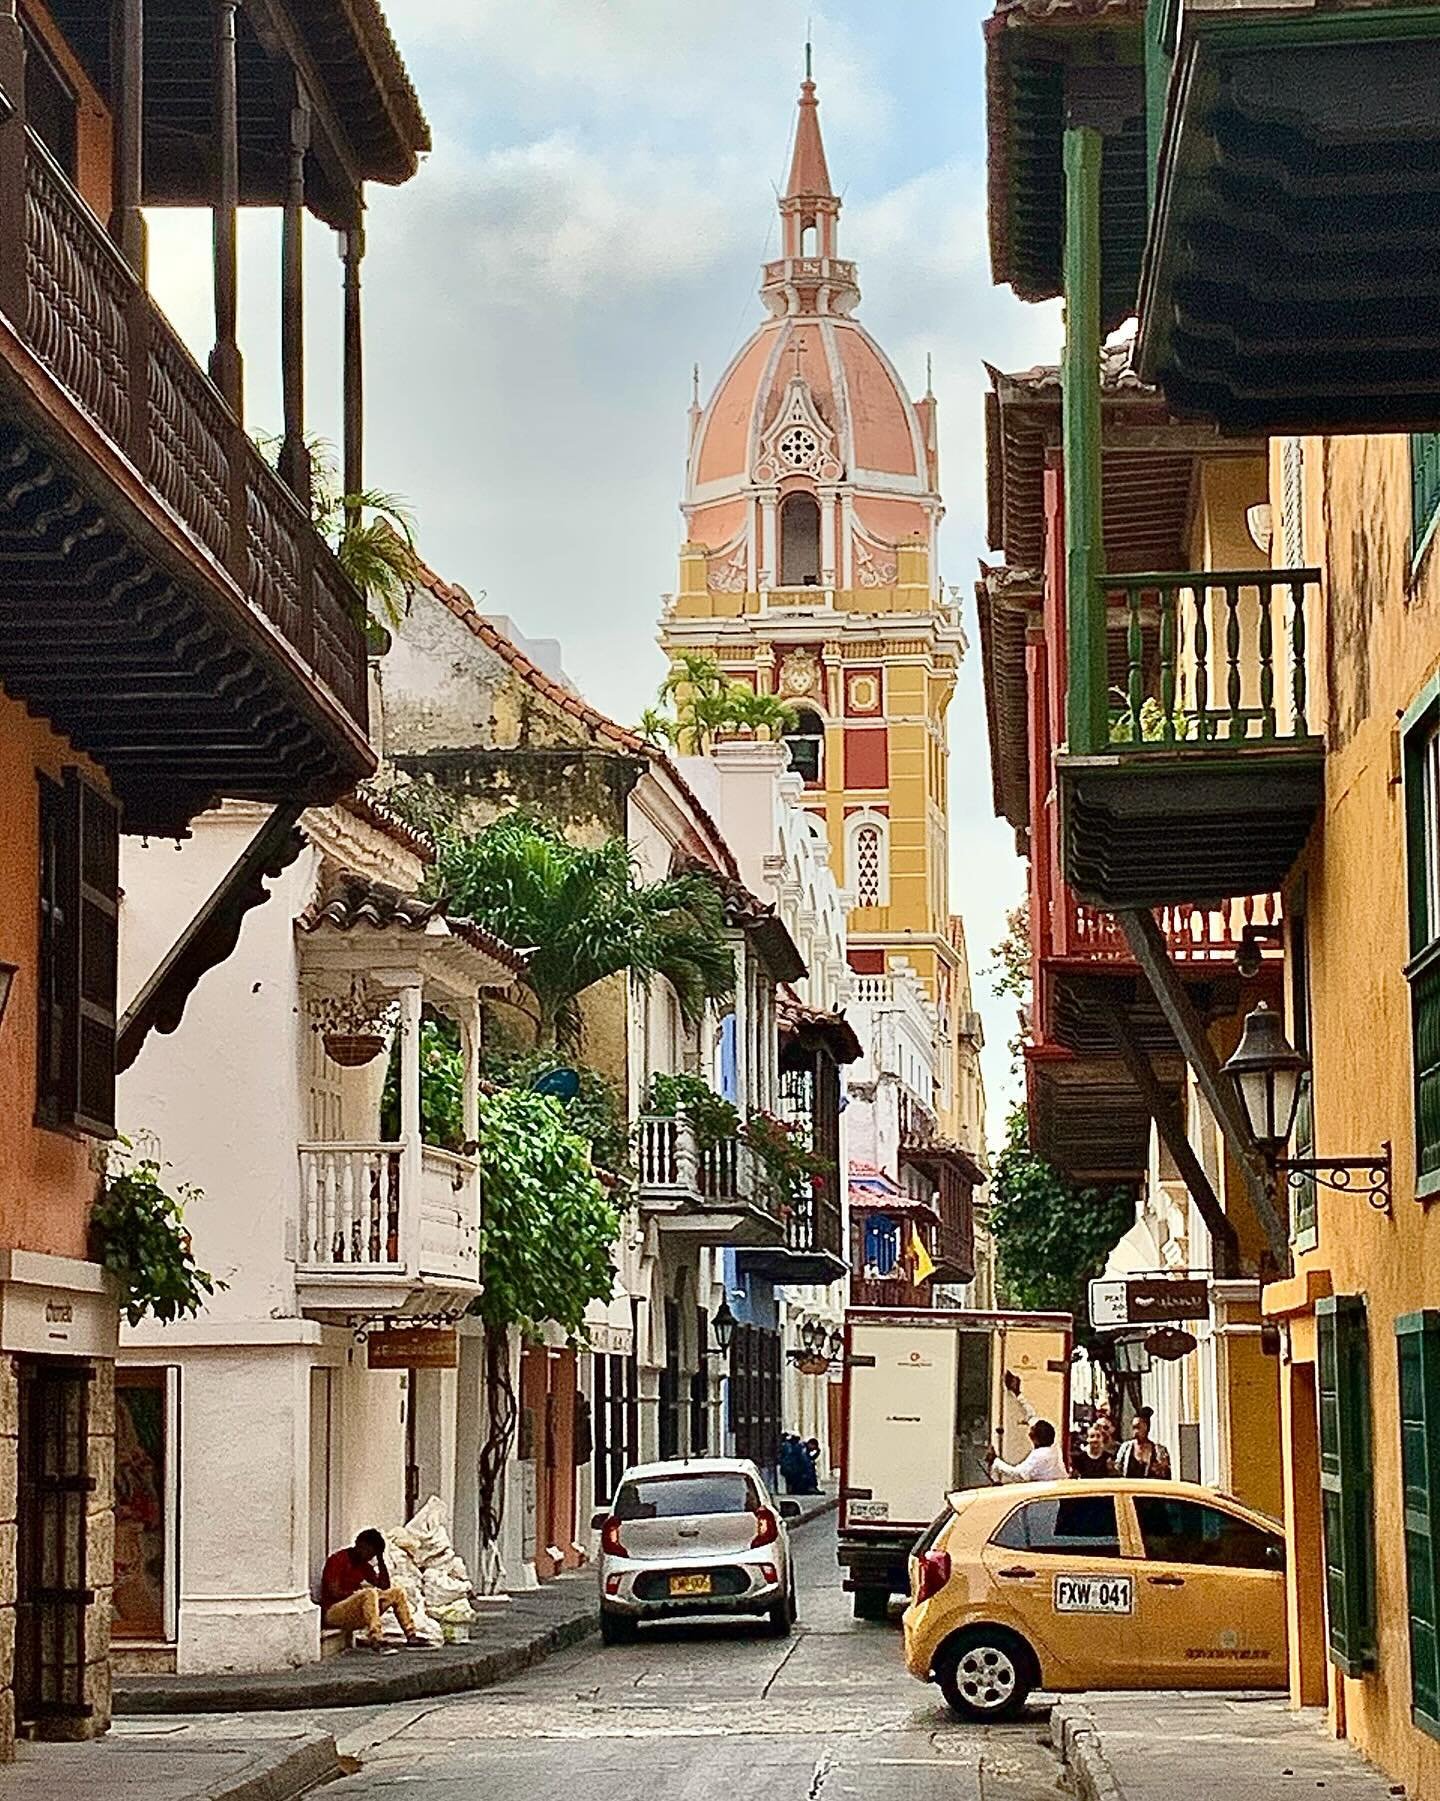 Cartagena was one of the most important American ports of the Spanish Empire (with Lima, Havana, Buenos Aires, Veracruz, Acapulco), particularly in transporting resources and people between Per&uacute; and Spain. The colorful colonial and early indep